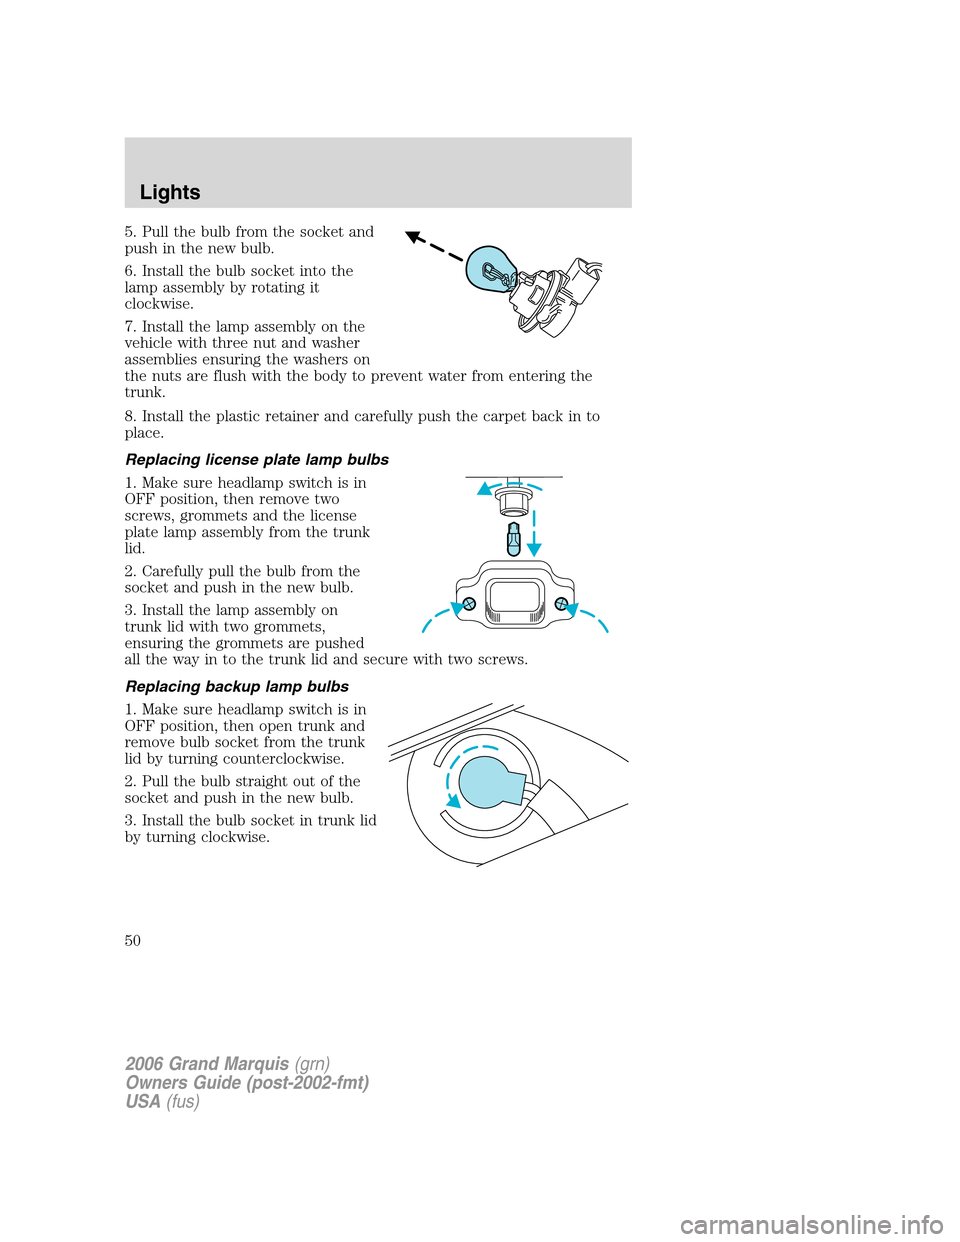 Mercury Grand Marquis 2006  Owners Manuals 5. Pull the bulb from the socket and
push in the new bulb.
6. Install the bulb socket into the
lamp assembly by rotating it
clockwise.
7. Install the lamp assembly on the
vehicle with three nut and wa